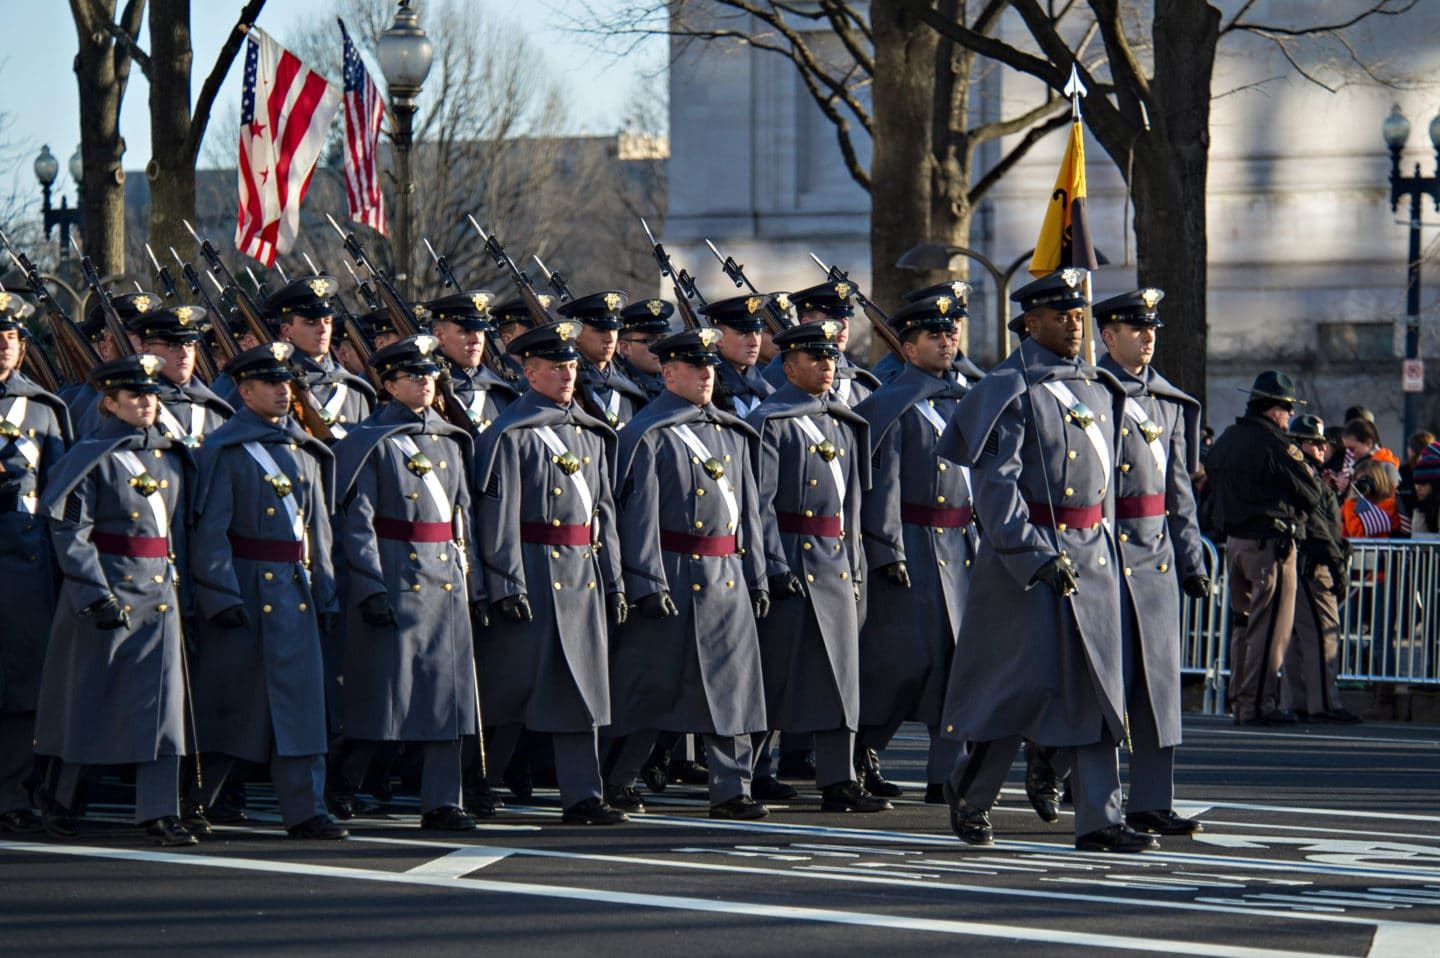 West Point cadets march in presidential inauguration parade